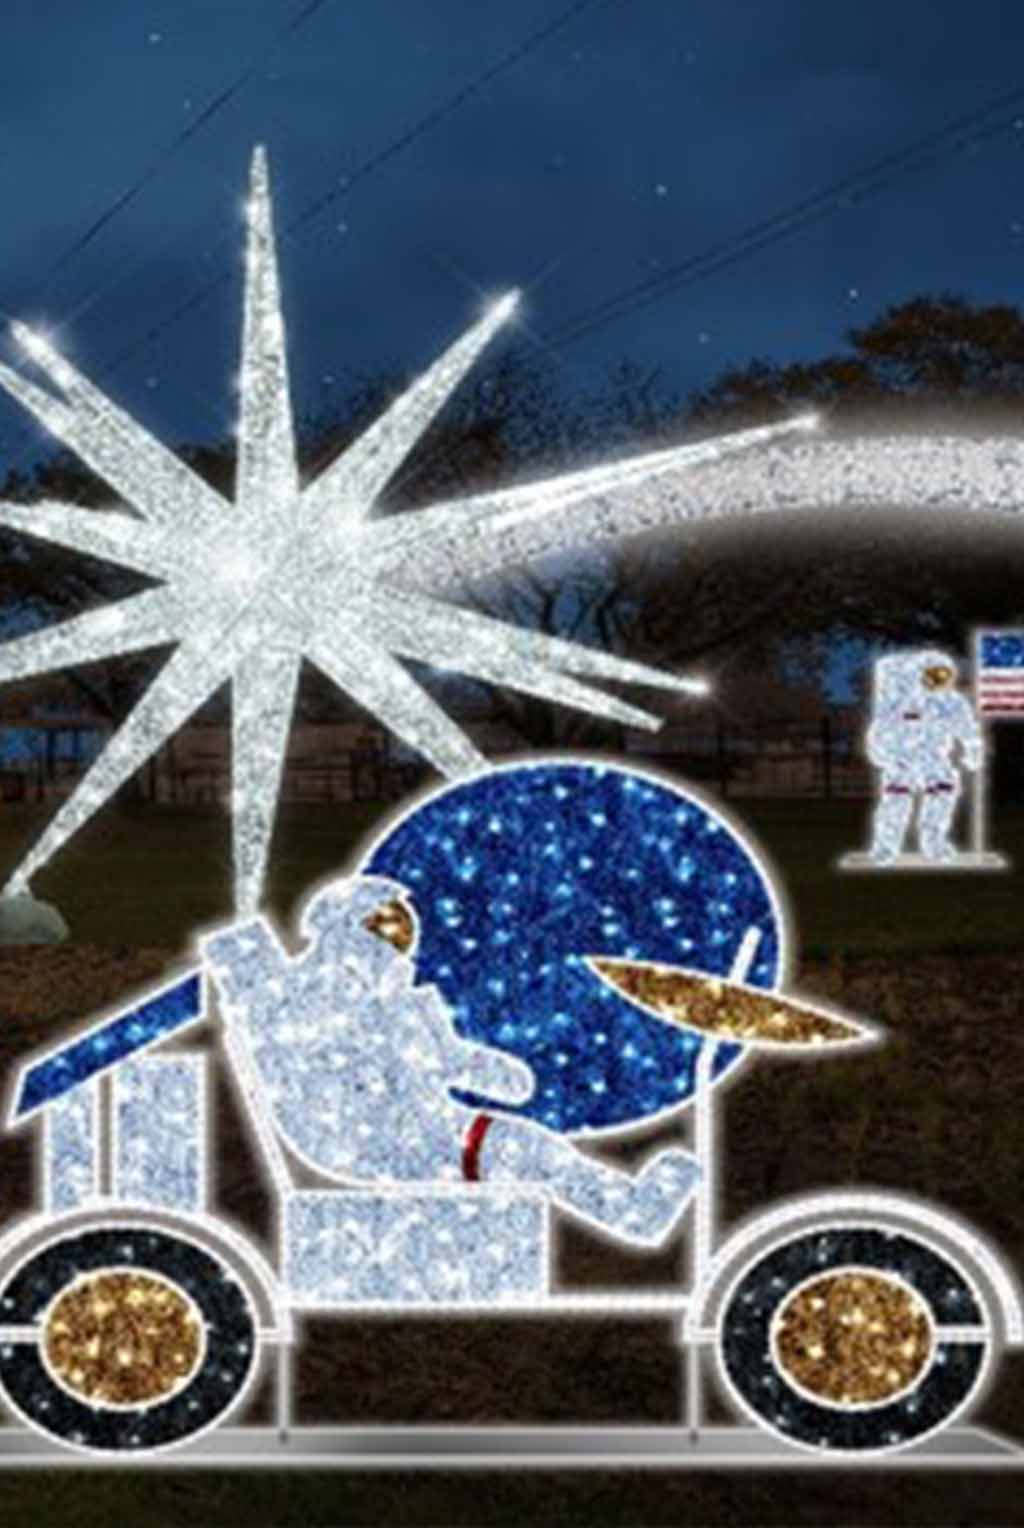 Best Christmas Light Displays in Katy and Houston